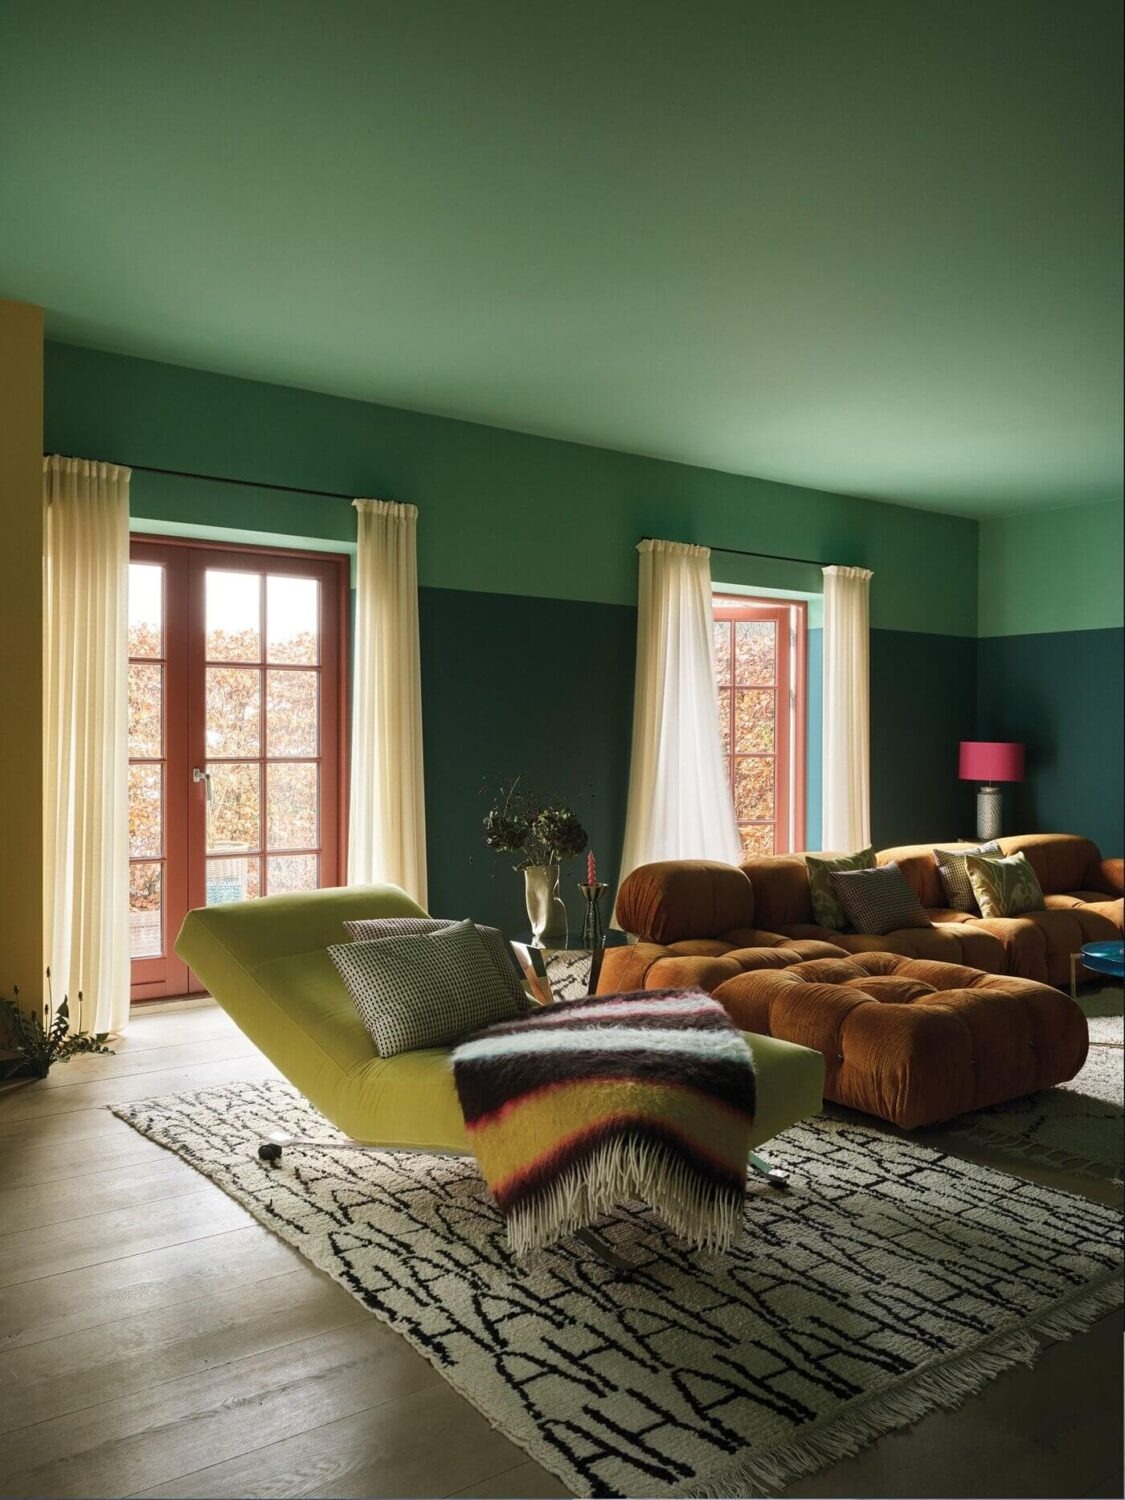 Two tone wall paint ideas is a popular interior design technique that involves using two distinct colors on a single wall or throughout a room.